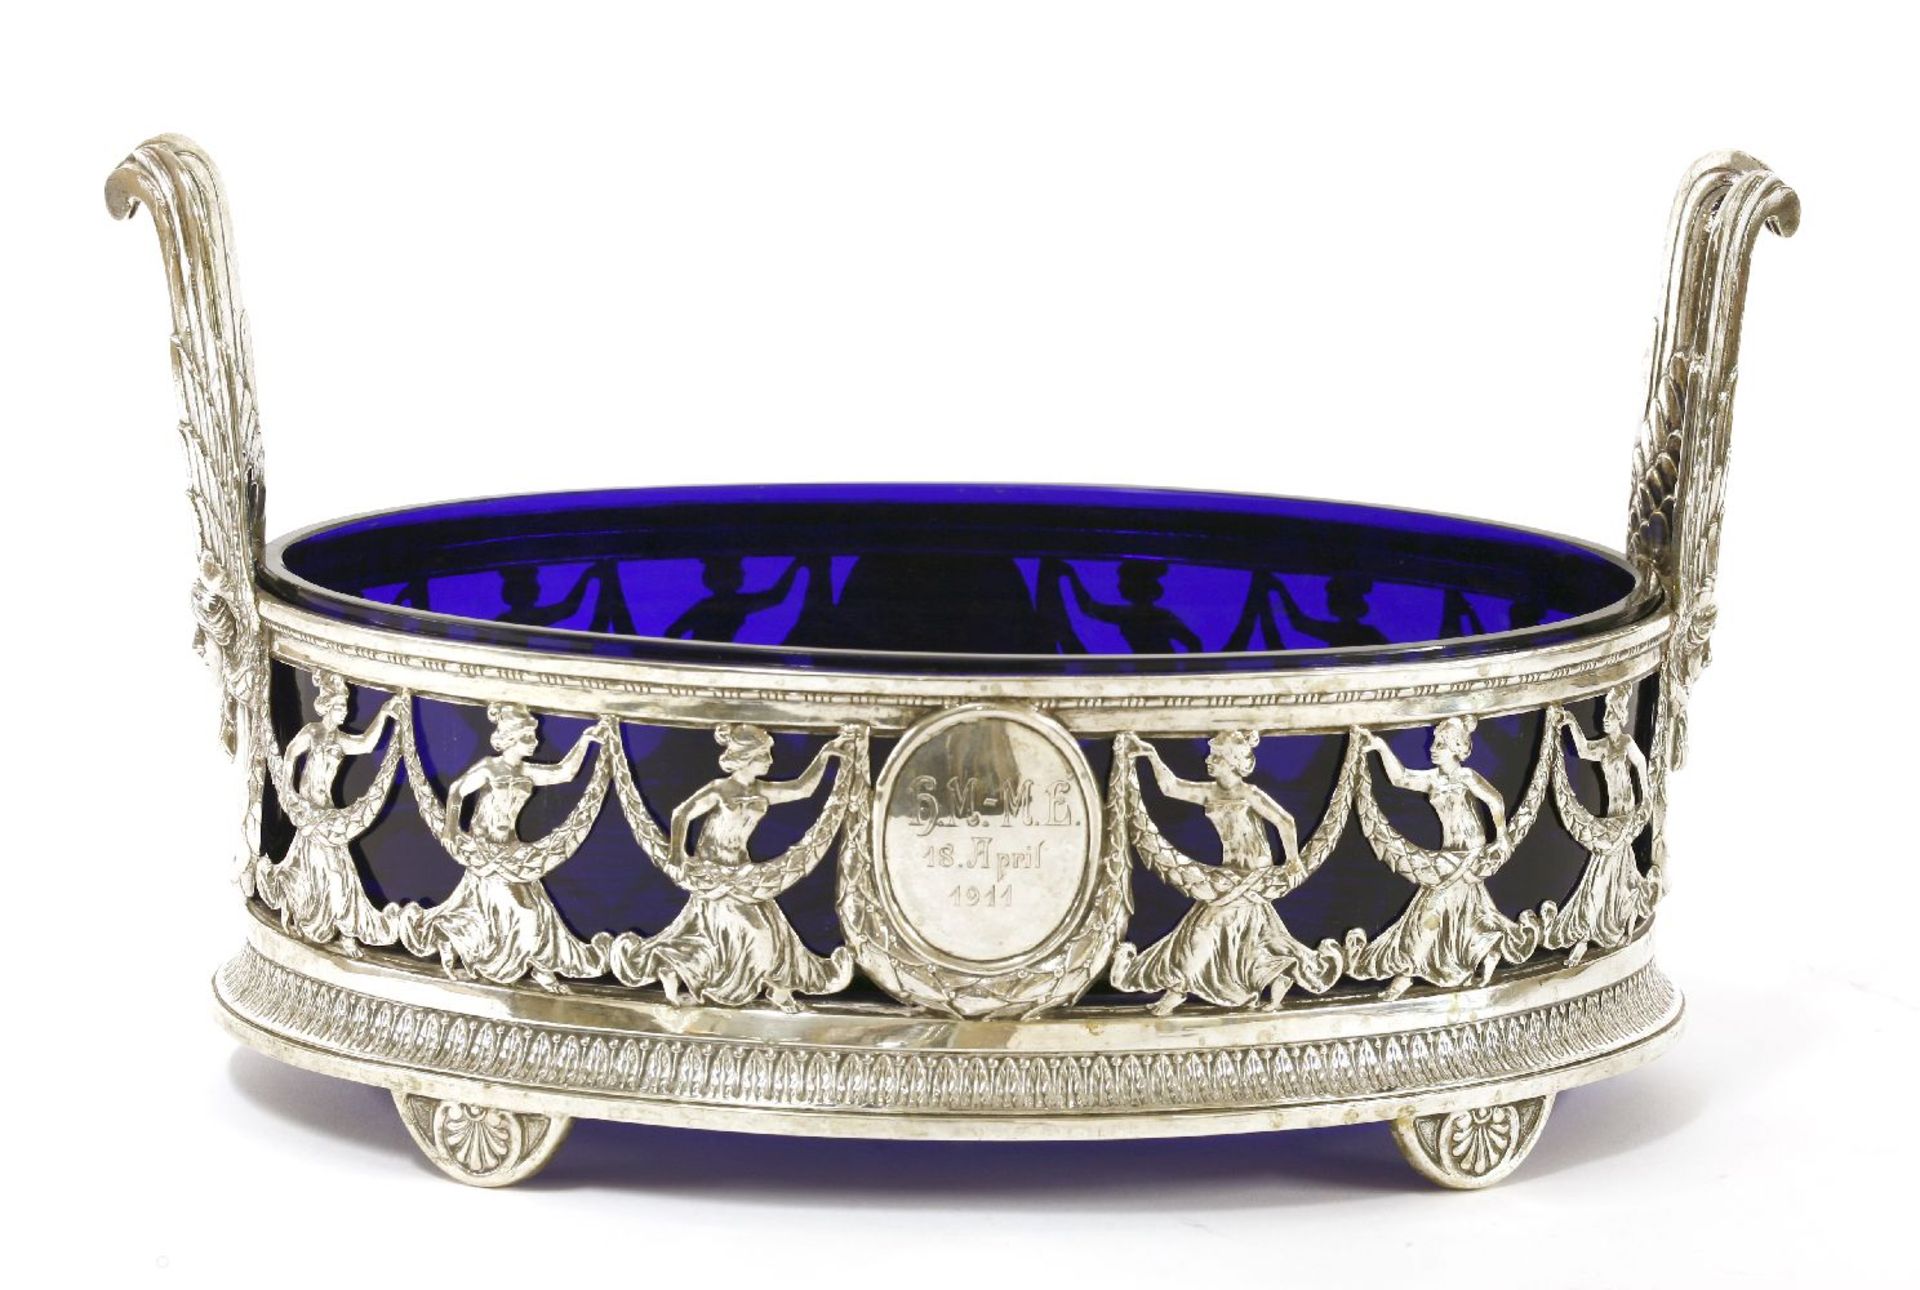 A German silver twin-handled centrepiece,early 20th century, of oval form with a beaded border